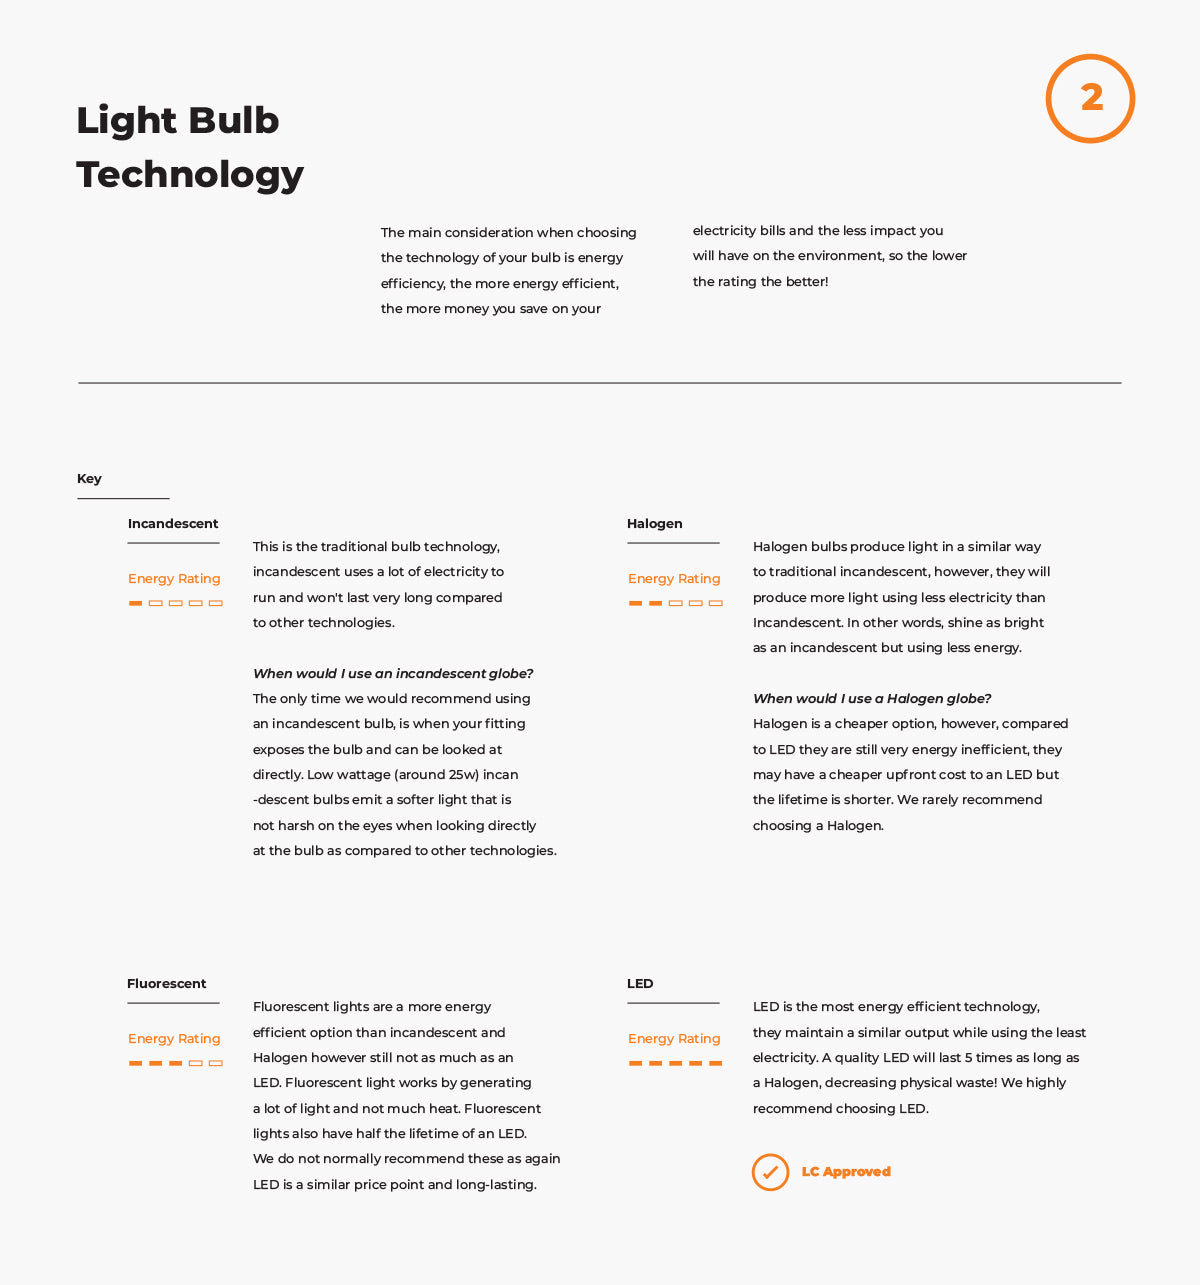 How to choose the right Light Bulb Technology